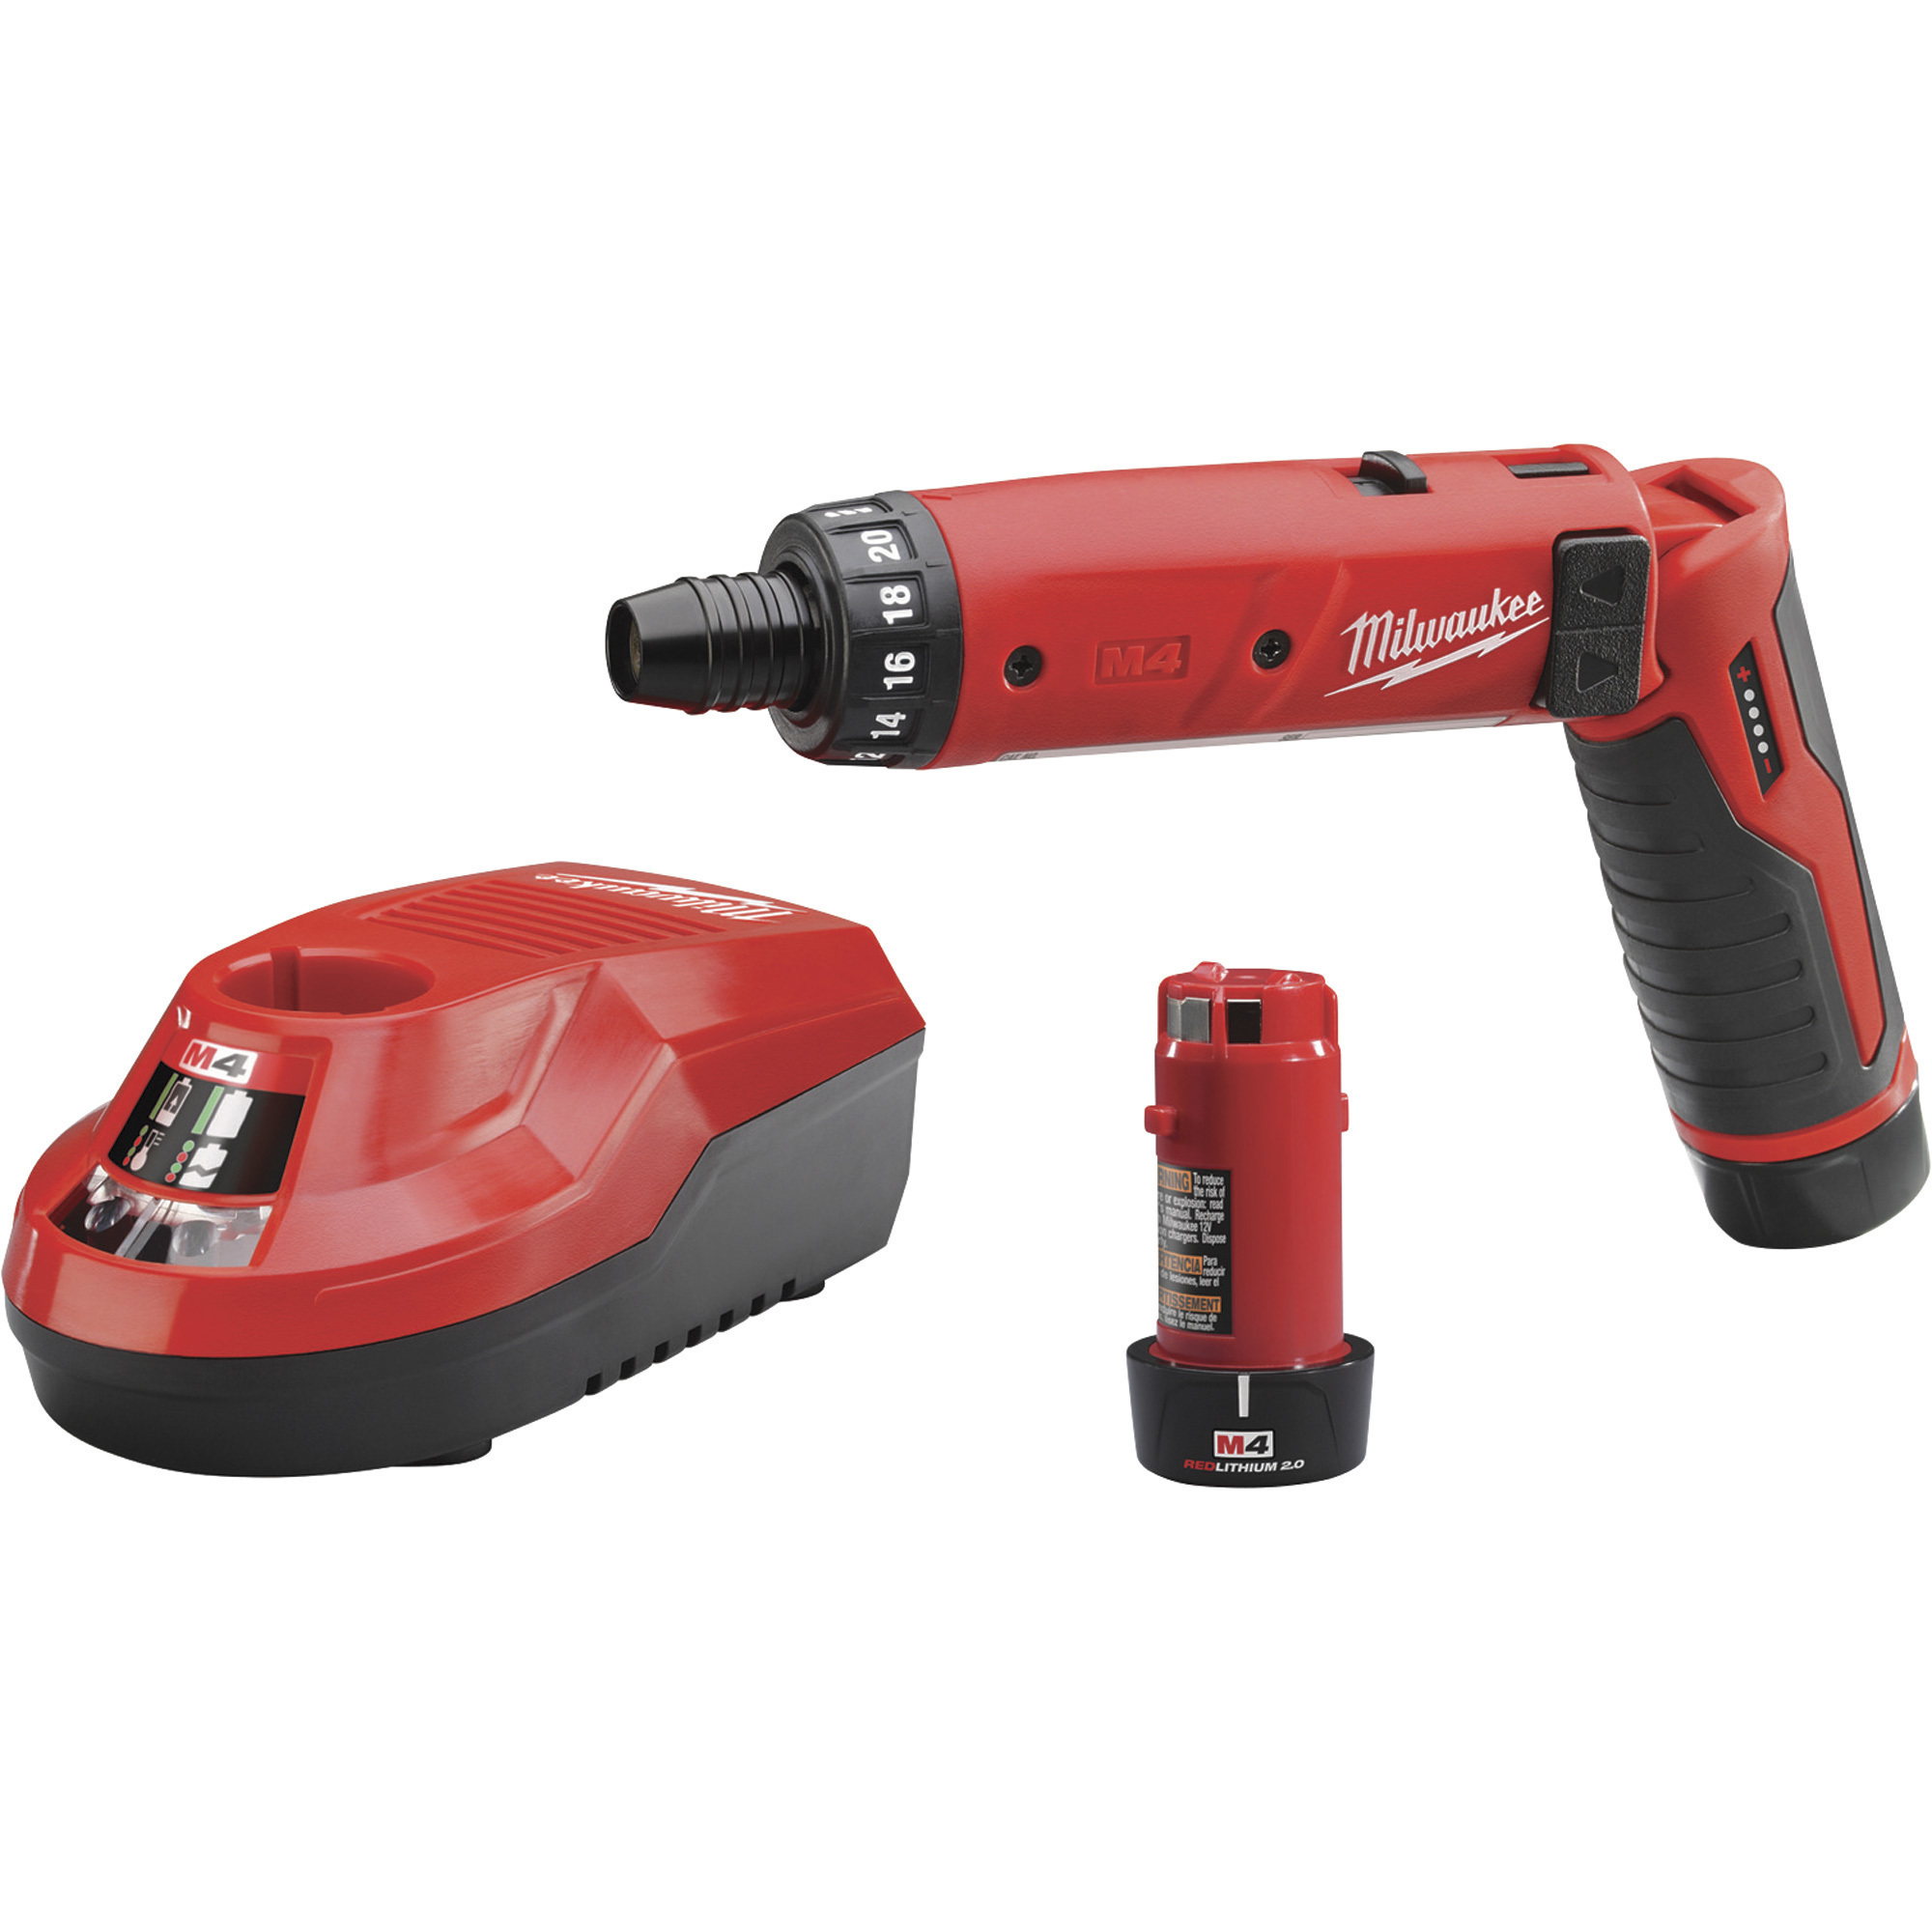 Milwaukee M4 Lithium-Ion Electric Hex Screwdriver Kit With 2 Batteries, 1/4Inch Keyless Chuck, 600 RPM, 44 Inch/Lbs. Torque, Model 2101-22